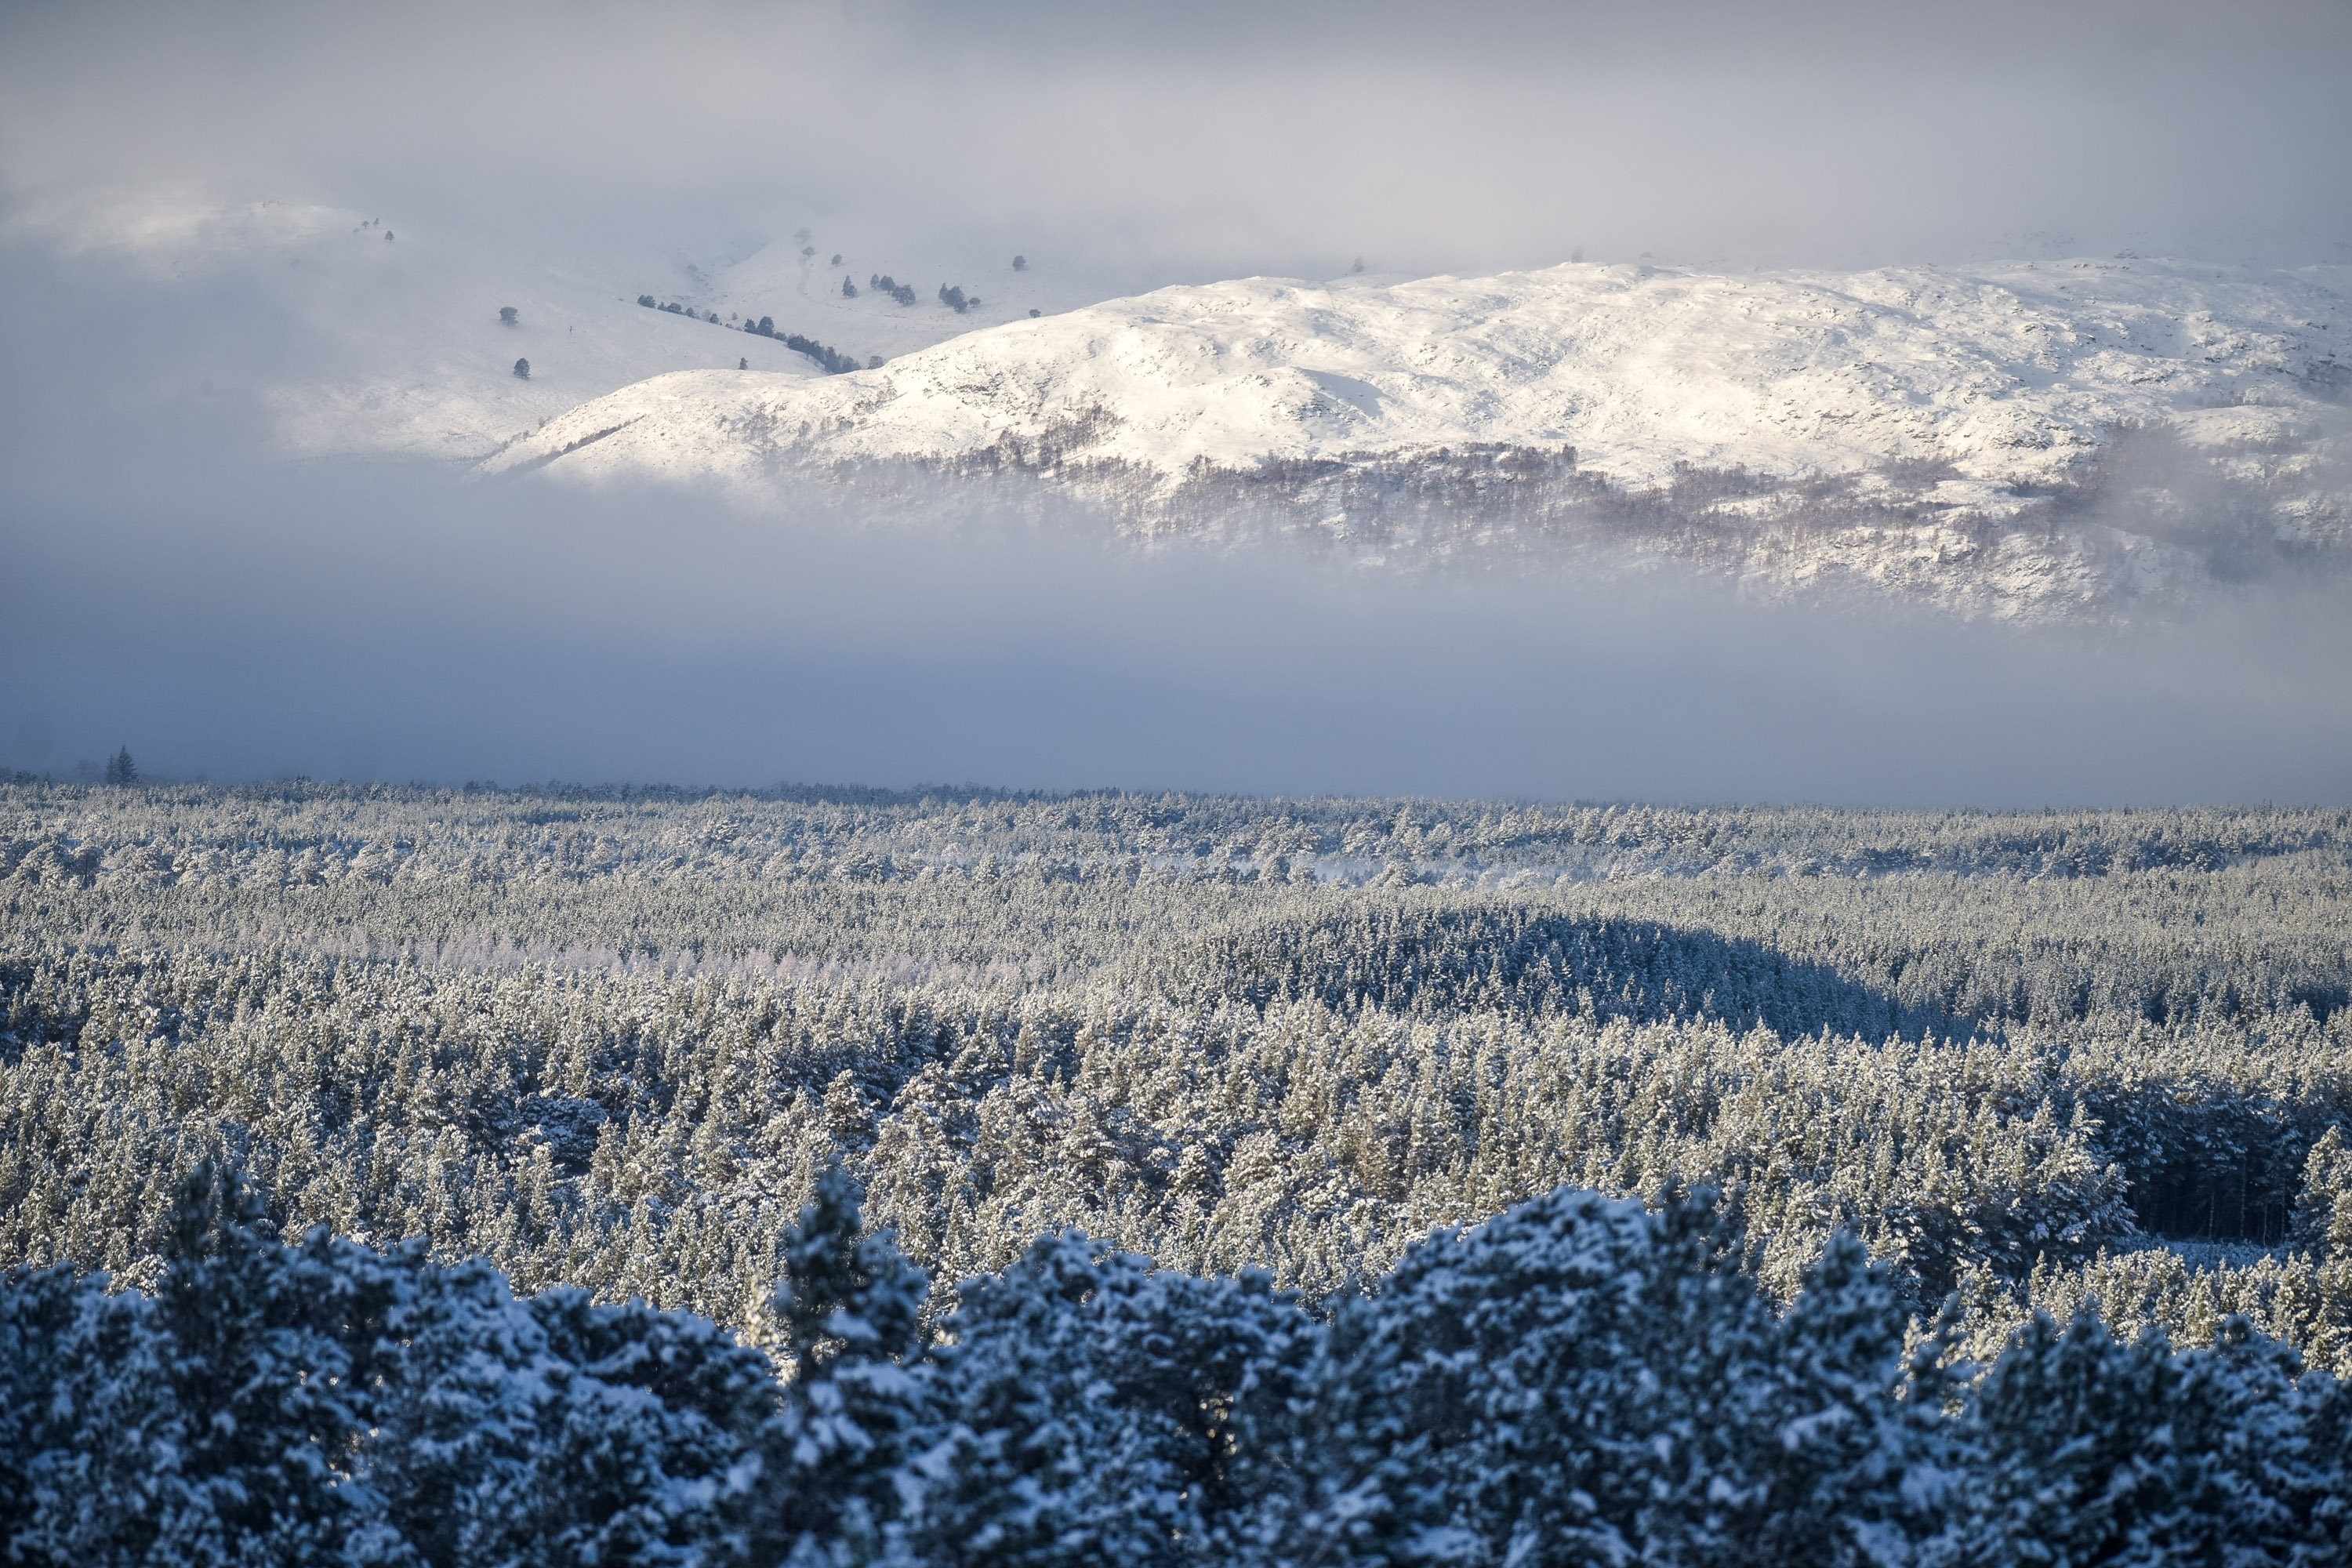 Snow covers trees and hills surrounding Aviemore in the Scottish Highlands on December 14 2015. Last night, Sunday, Scotland's coldest temperature for this Winter was recorded in Dalwhinnie at -8.7C. Up to 15cm of snow fell in Aviemore overnight and local schools were closed.